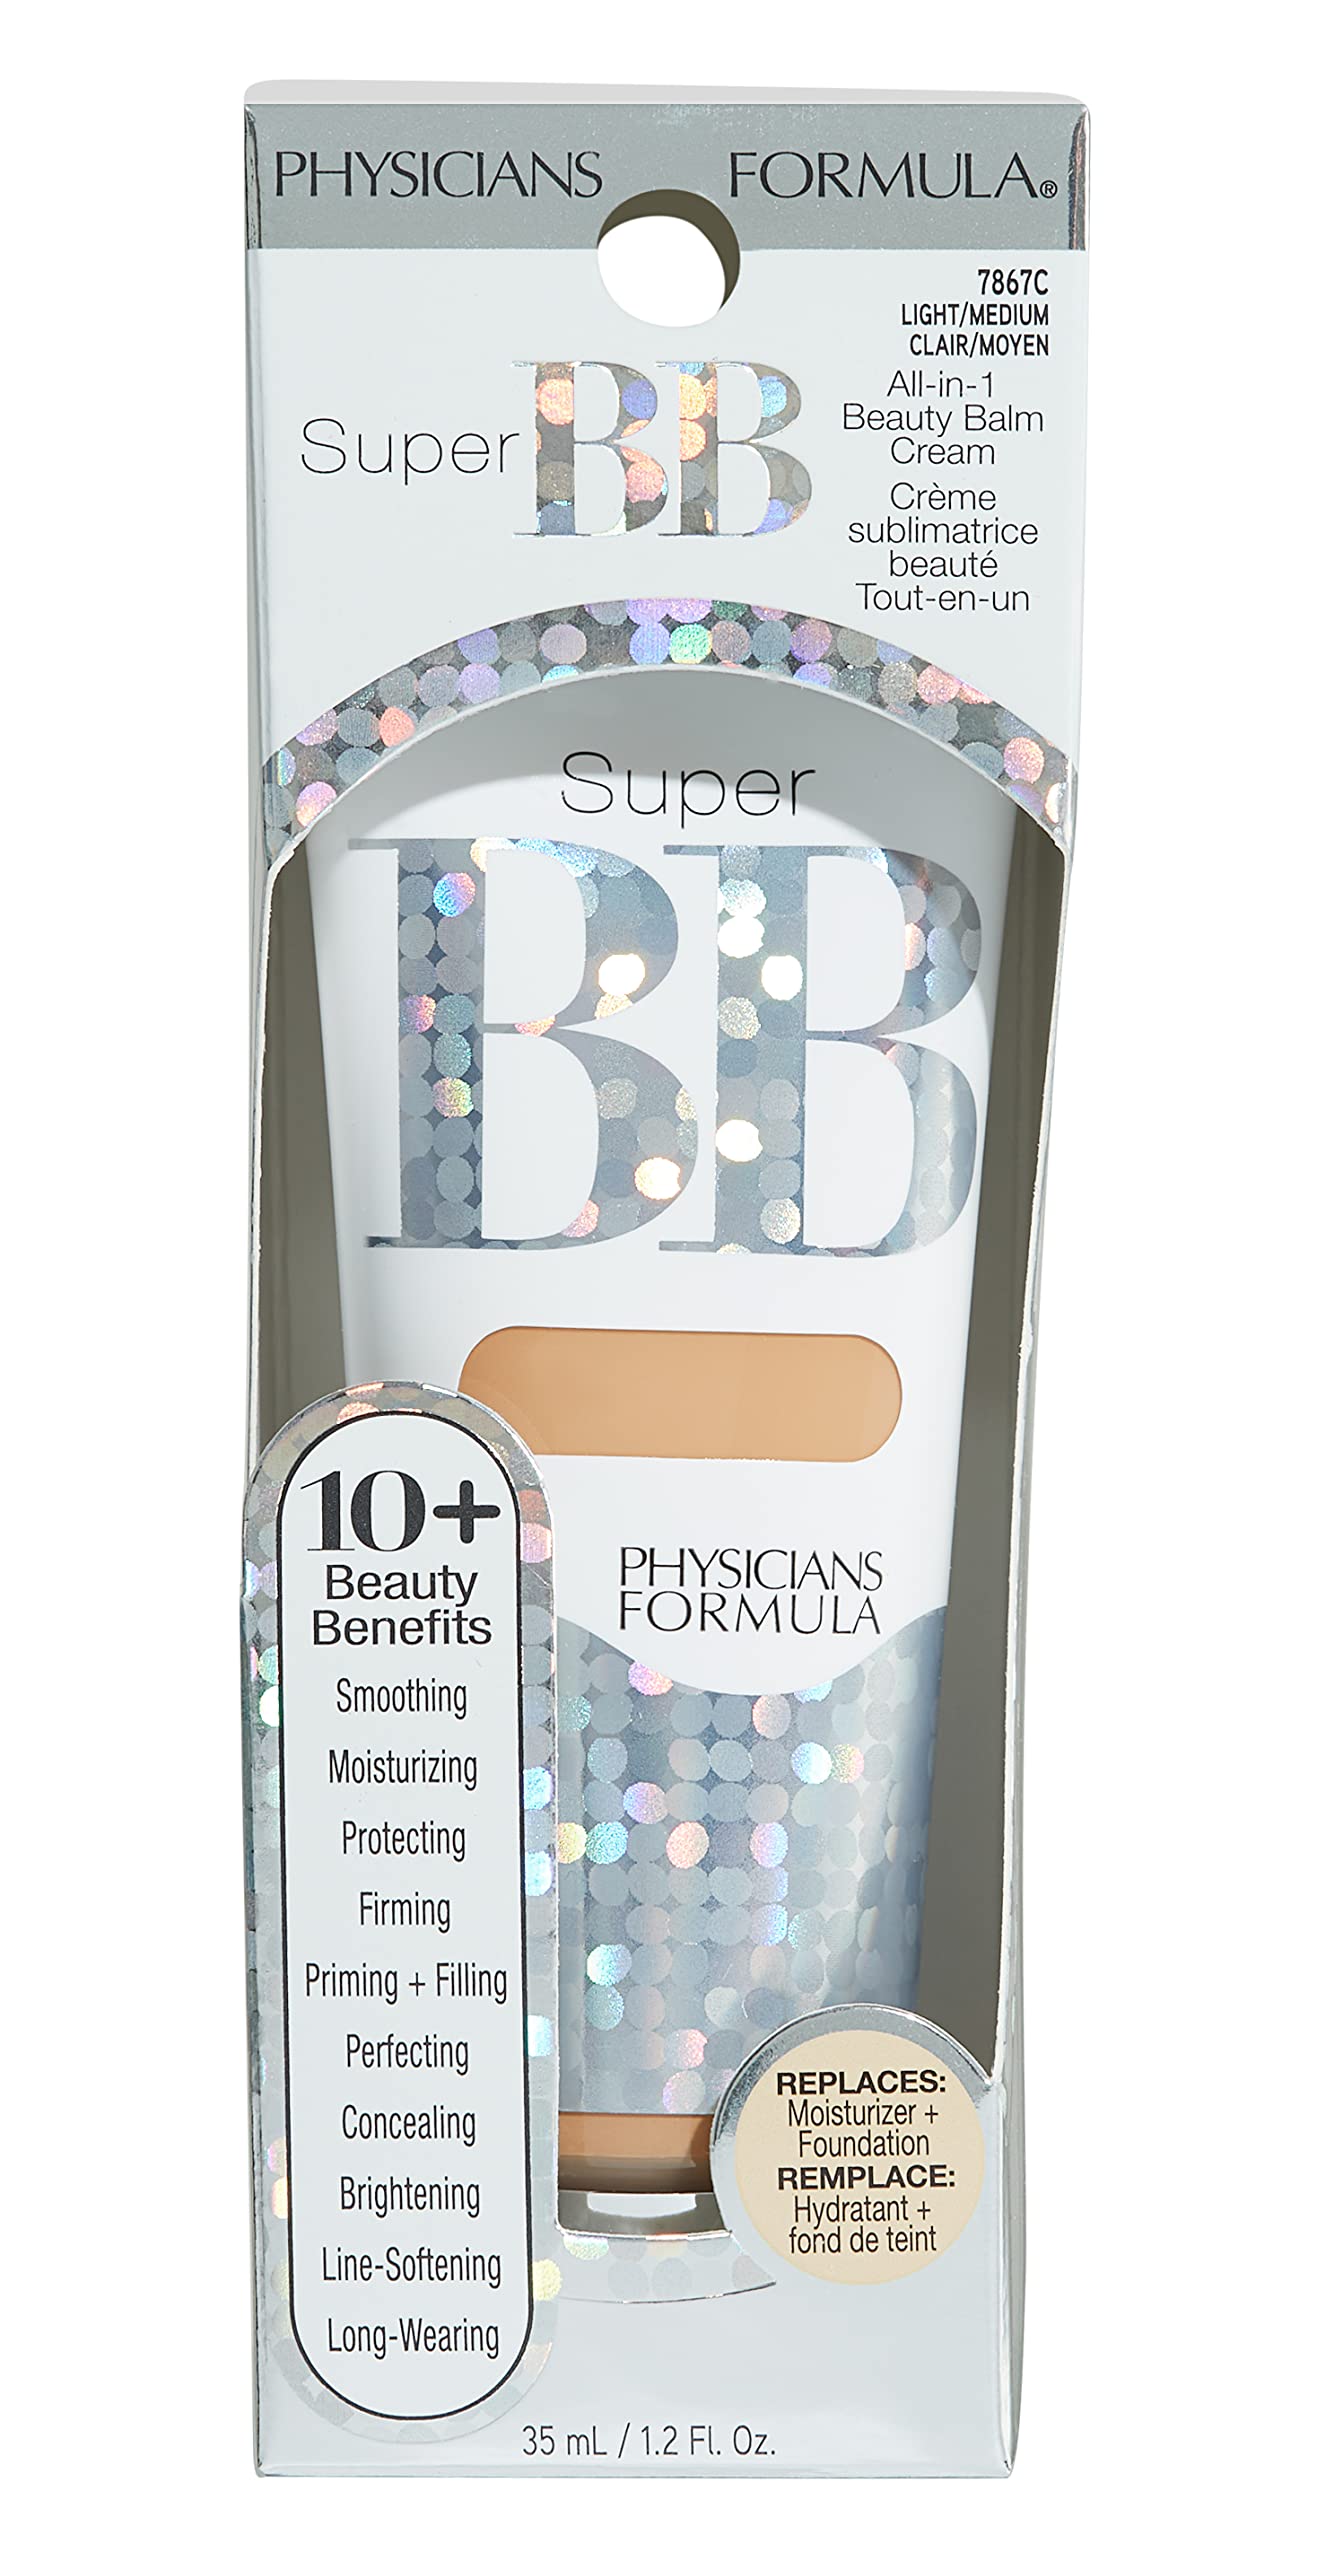 Physicians Formula Super BB All-in-1 Beauty Balm Cream Light/Medium | Dermatologist Tested, Clinicially Tested